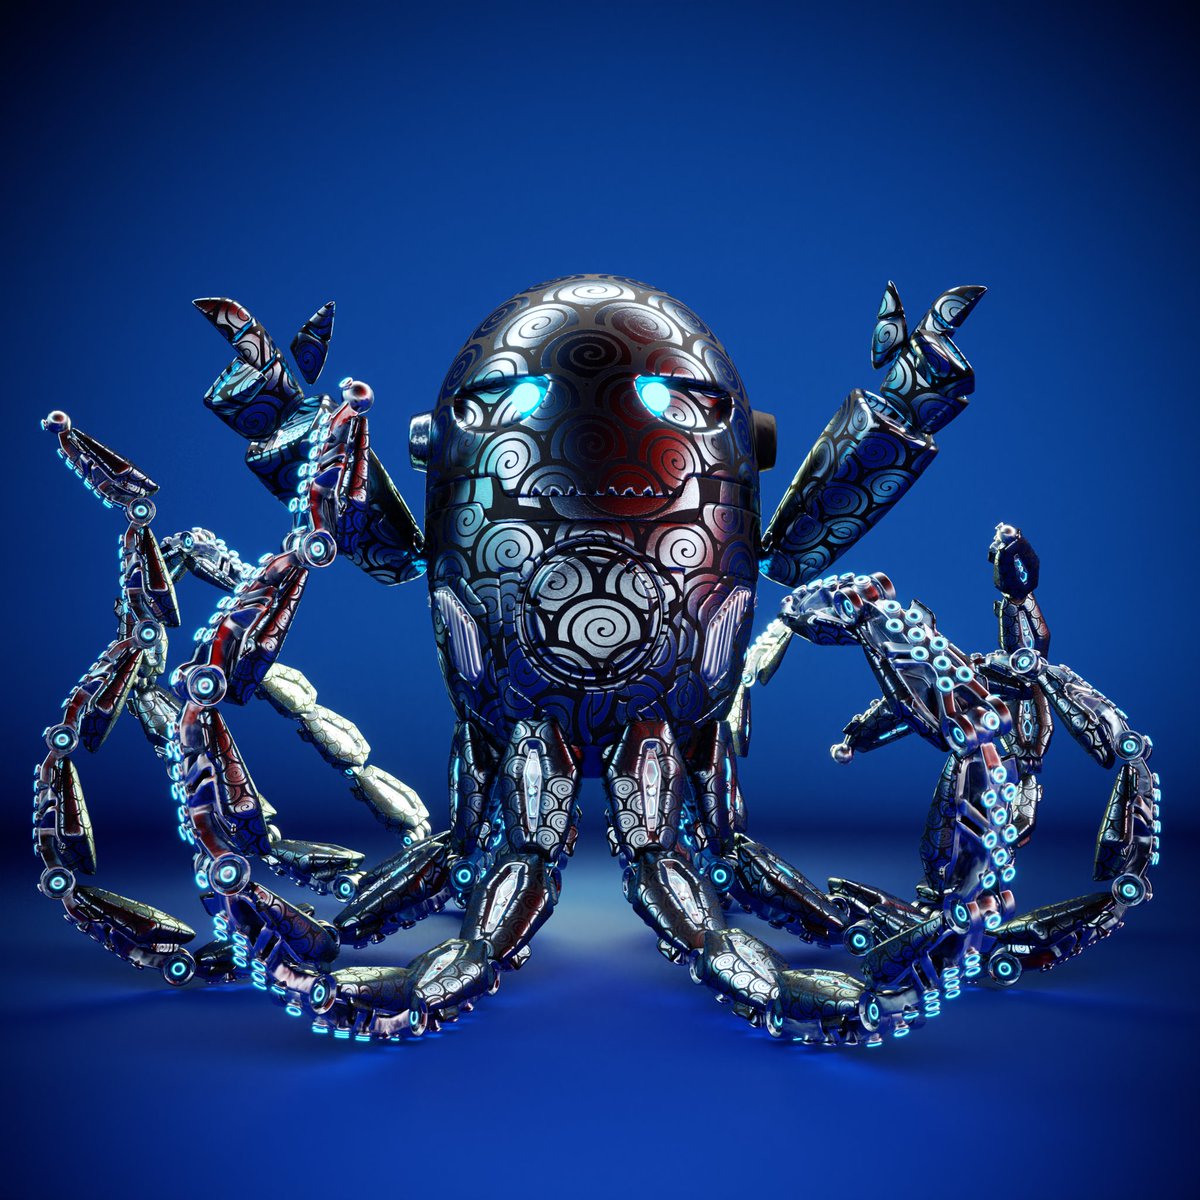 Not long to airdrop! Fully animated AR OctoDroids coming! 🐙🤖 #sneakpeek #NFT #CNFT #Cardano